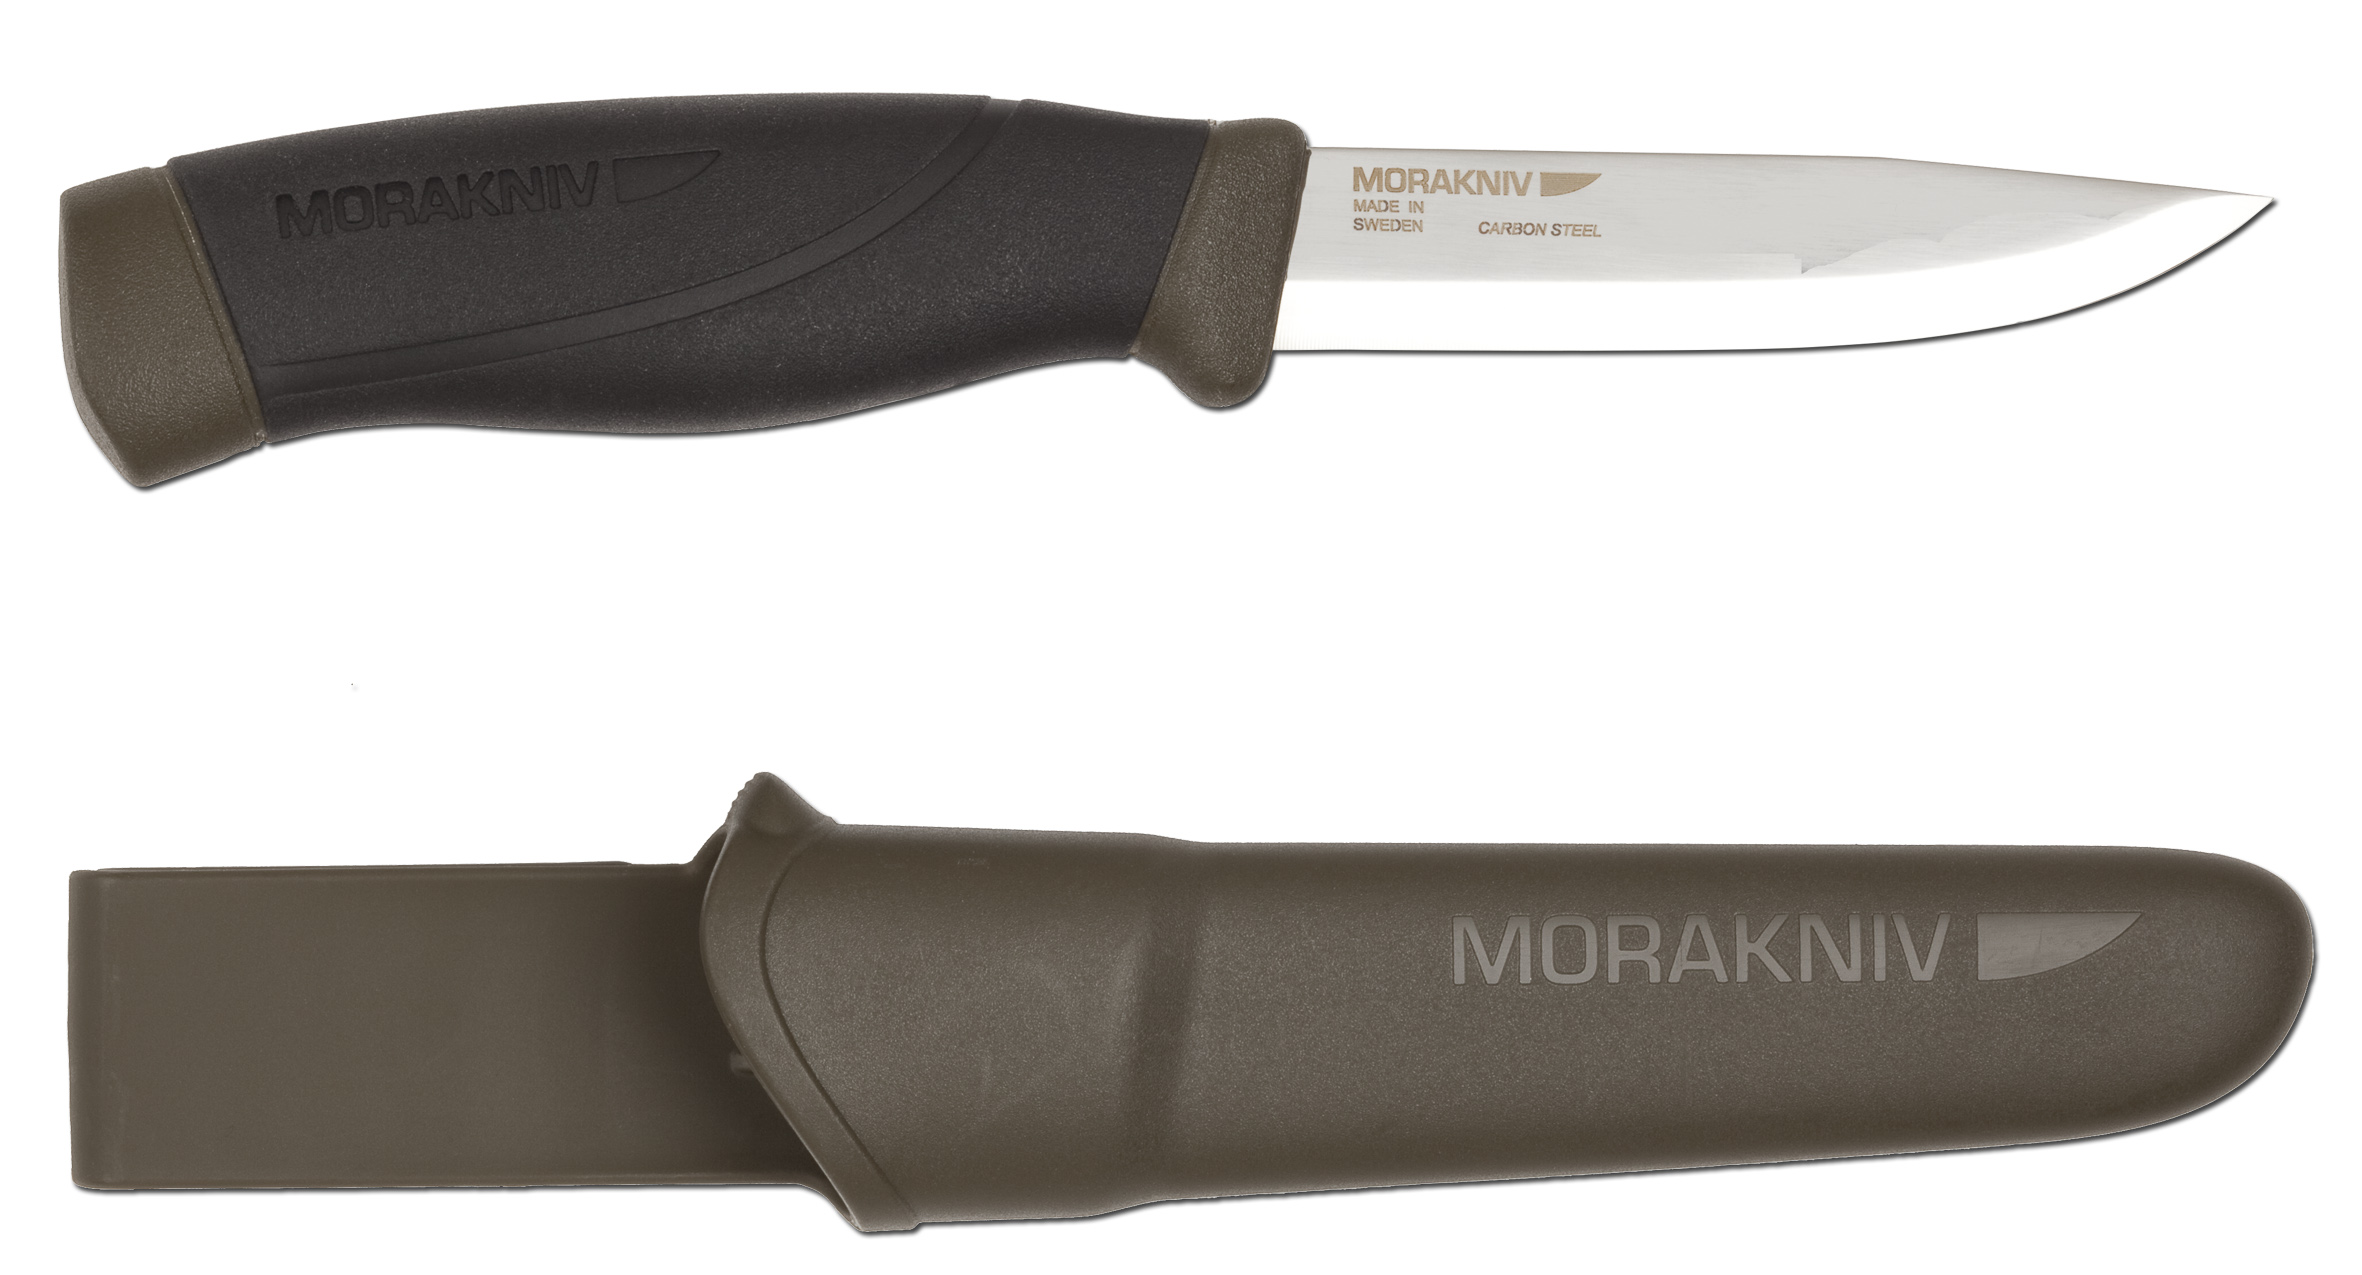 An Introduction to Mora Bushcraft Knives